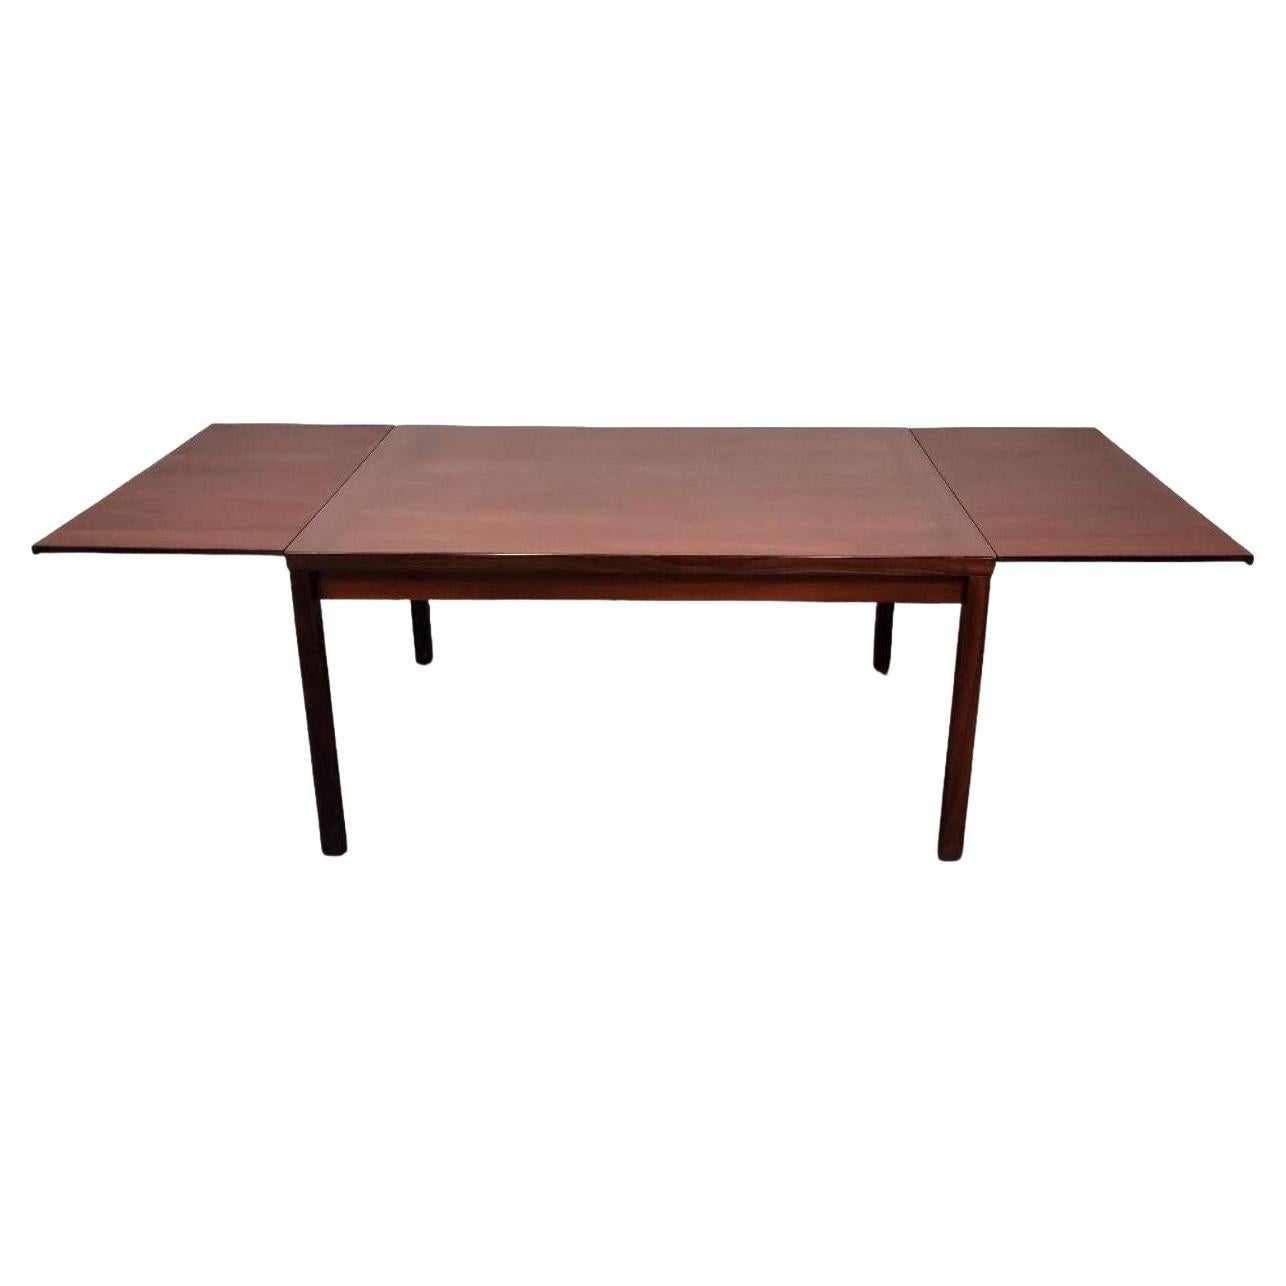 Vintage 1960s Danish Modern Rosewood Extendable Dining Table Made In Denmark For Sale